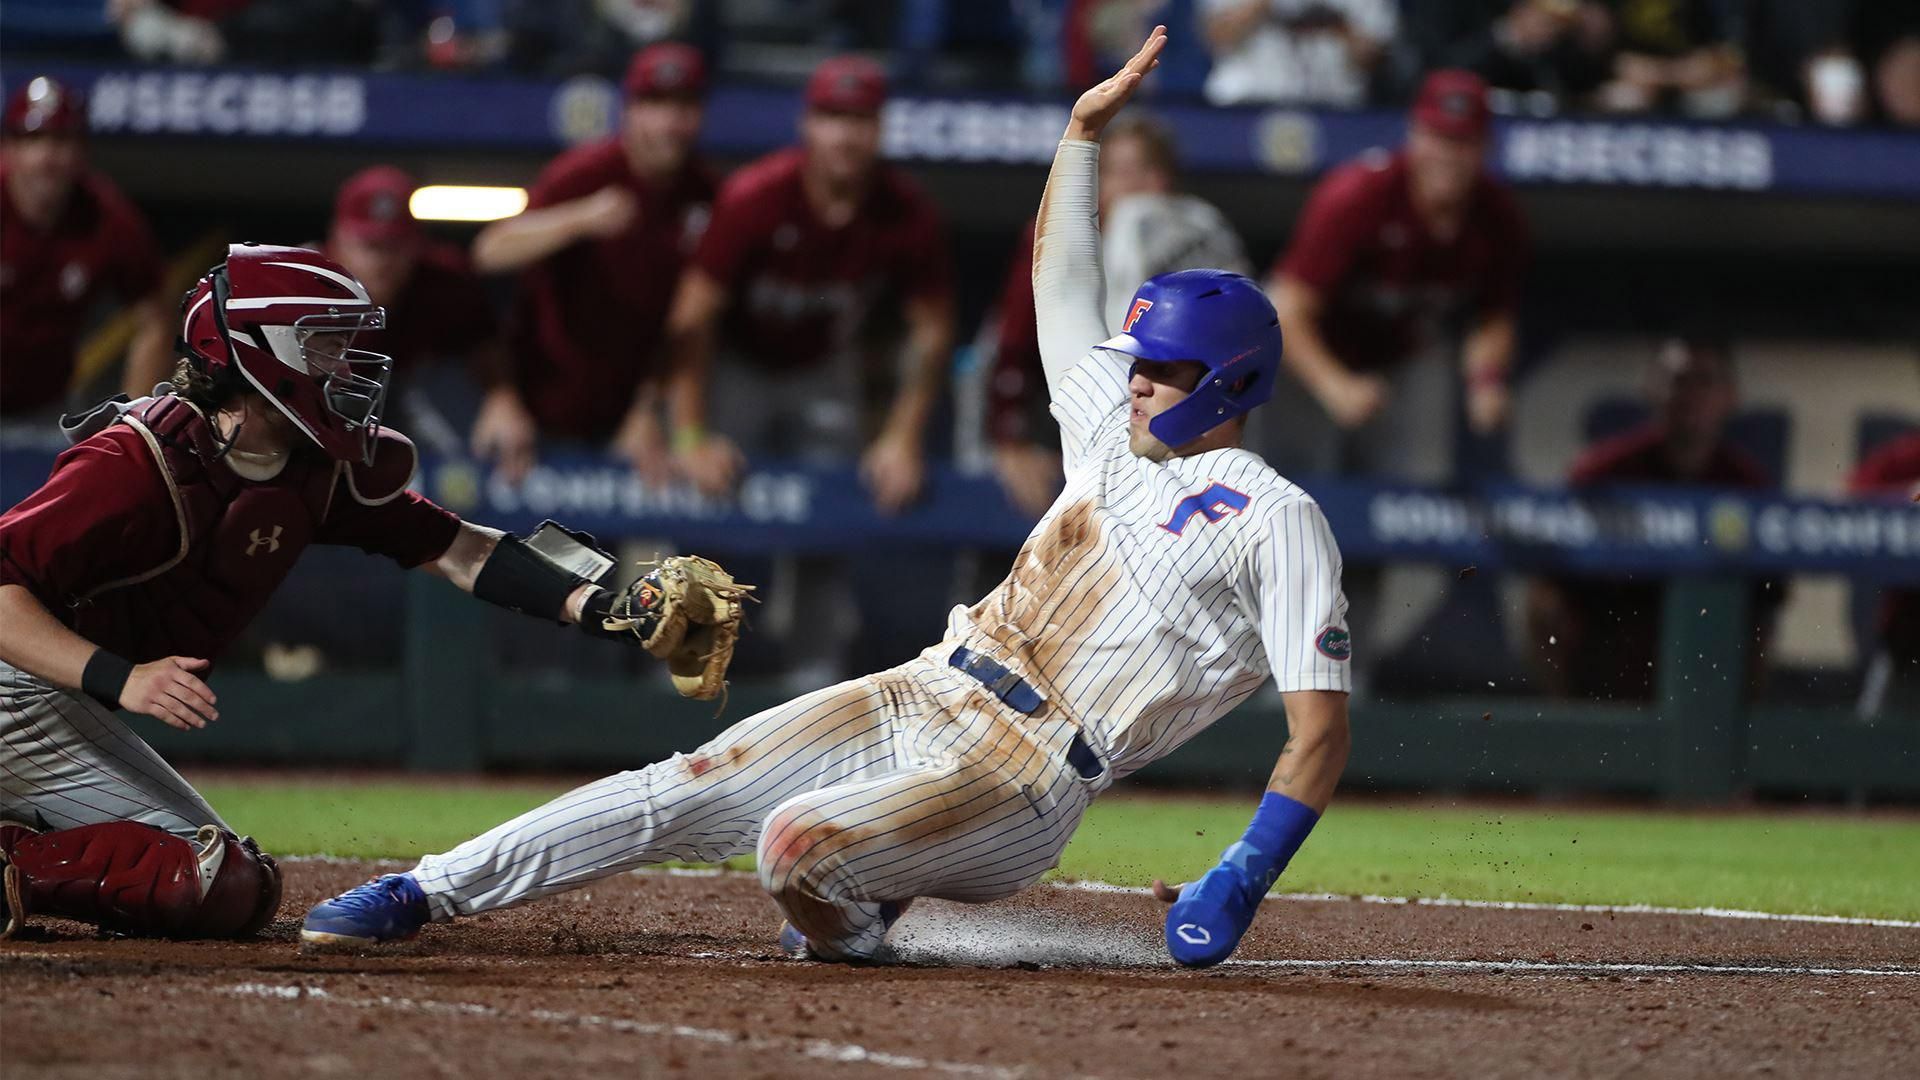 7-seed UF walks off 10-seed Gamecocks in extra innings